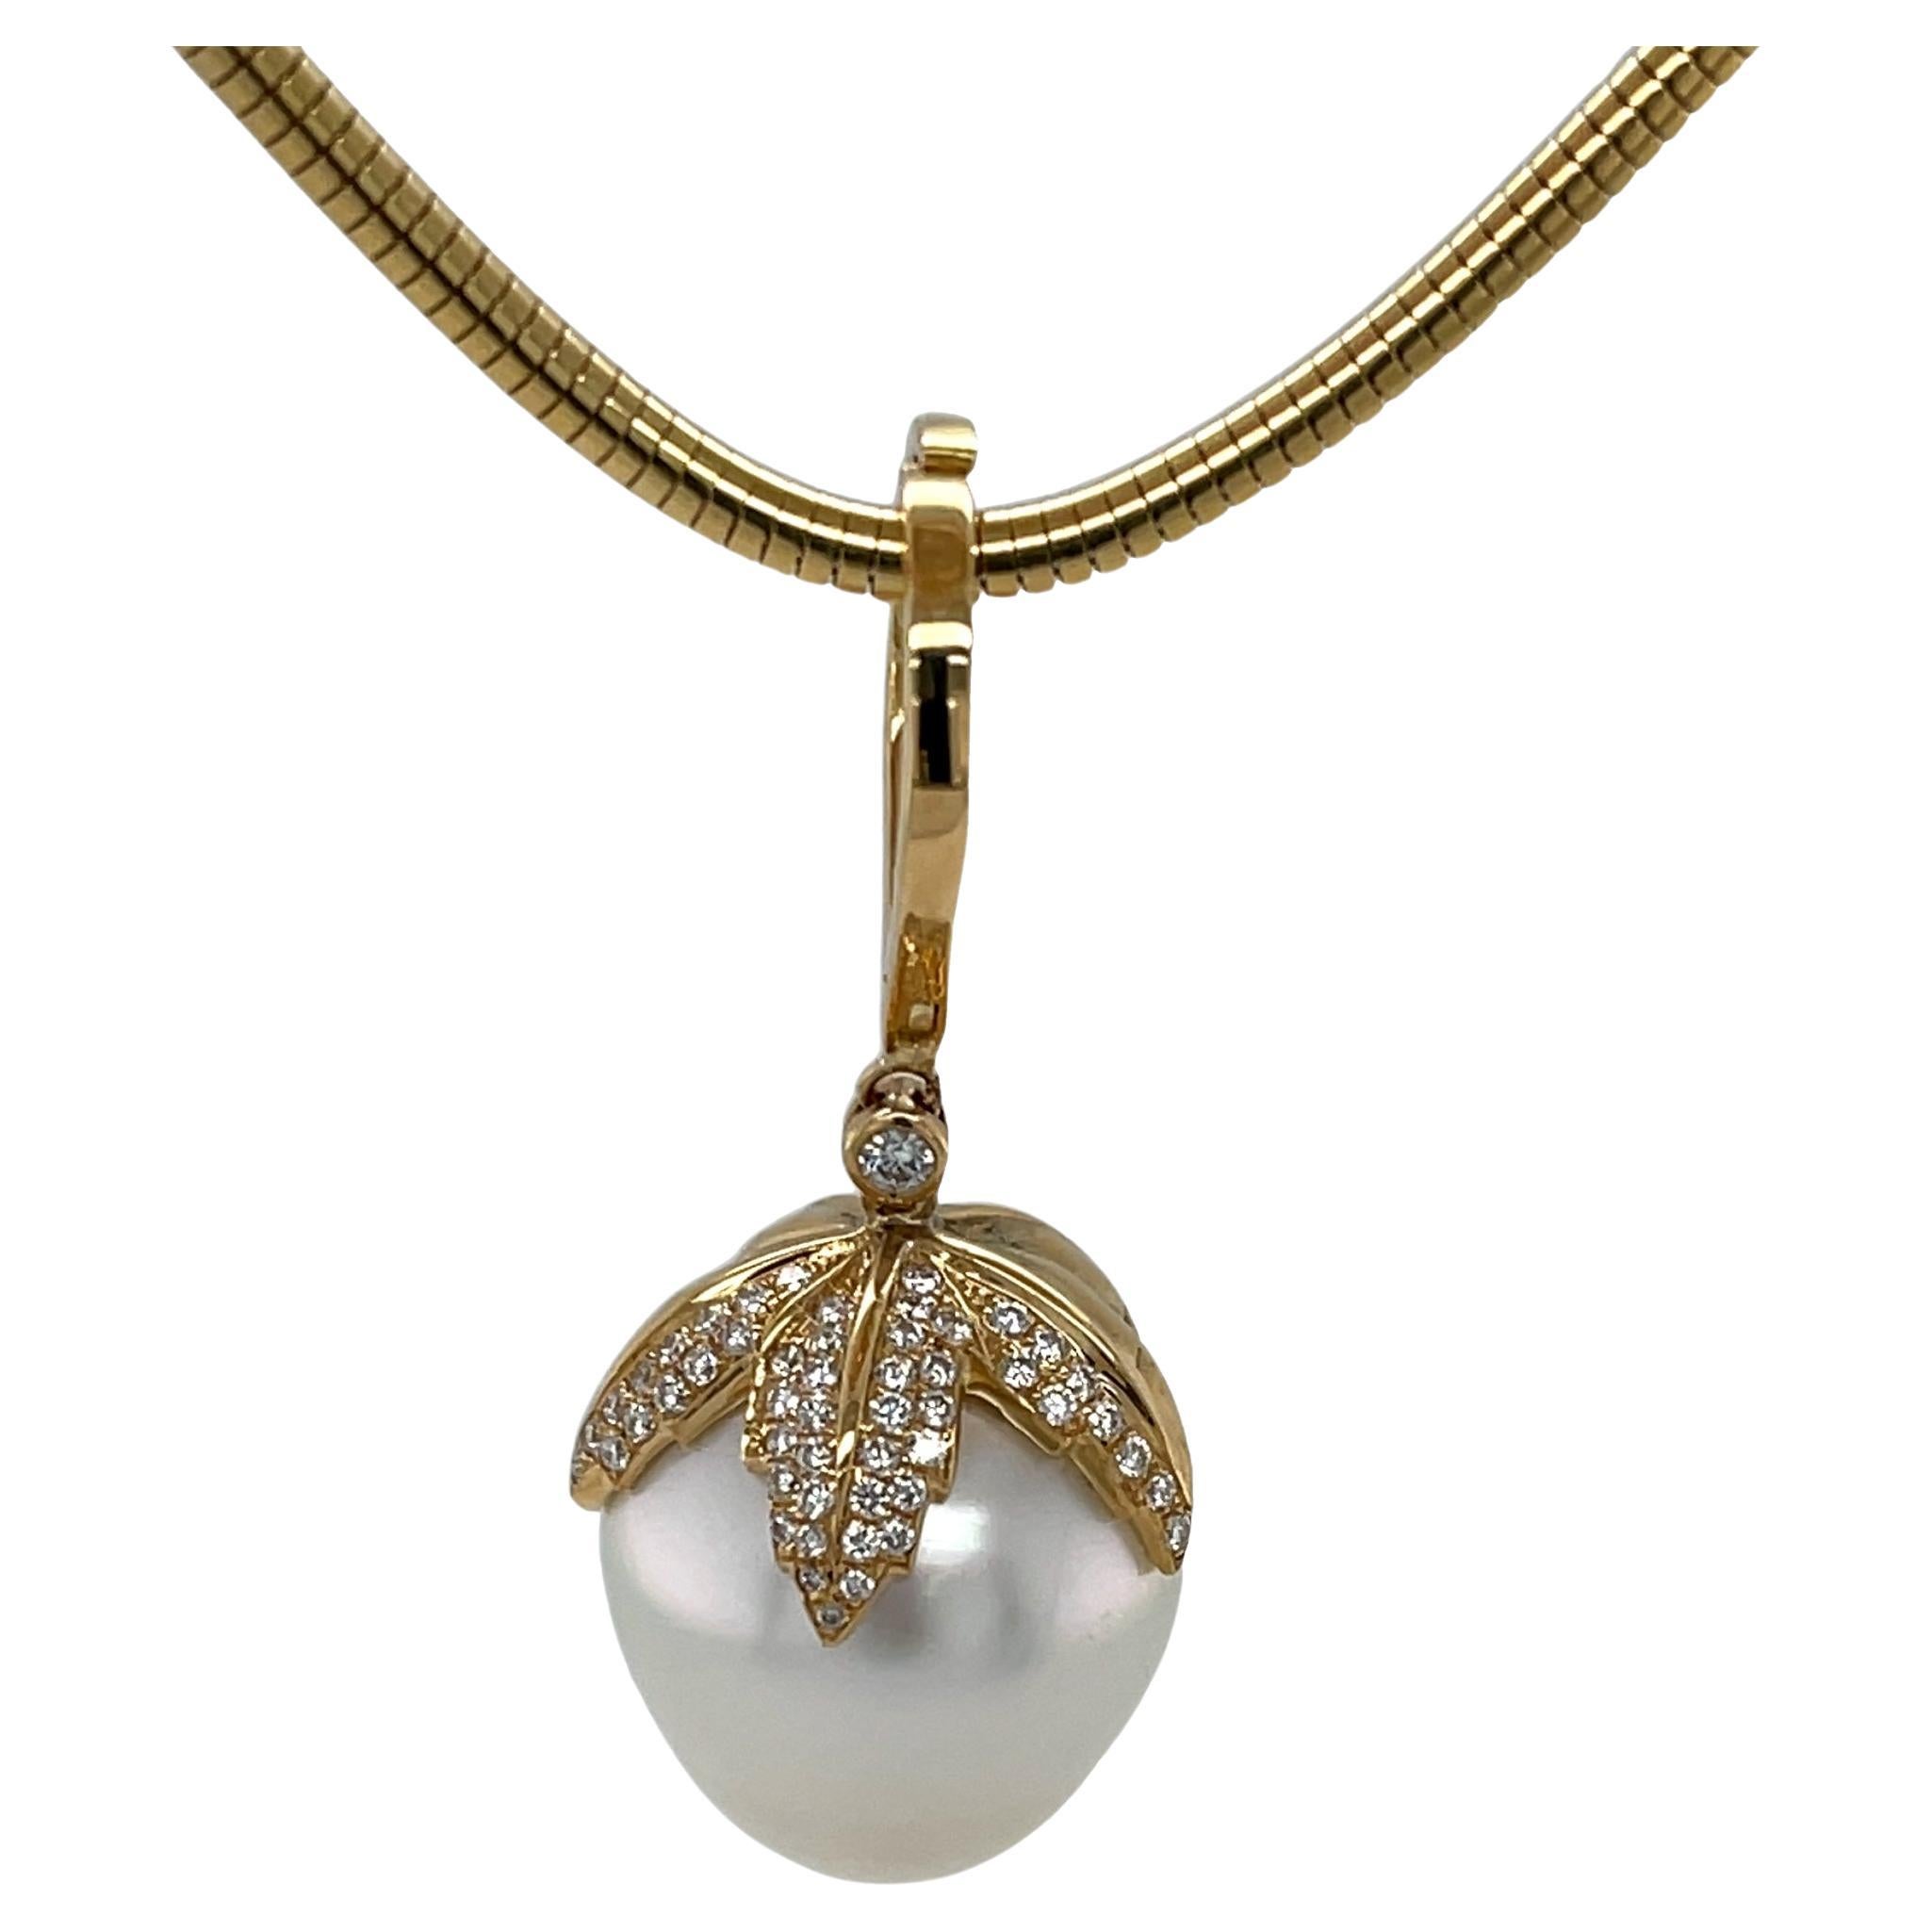 This gorgeous necklace pairs an impressive, diamond-studded South Sea pearl and yellow gold pendant with a 48-inch double strand of 3mm Akoya saltwater pearls! The pendant features a very large 16mm South Sea pearl with shiny white luster attached